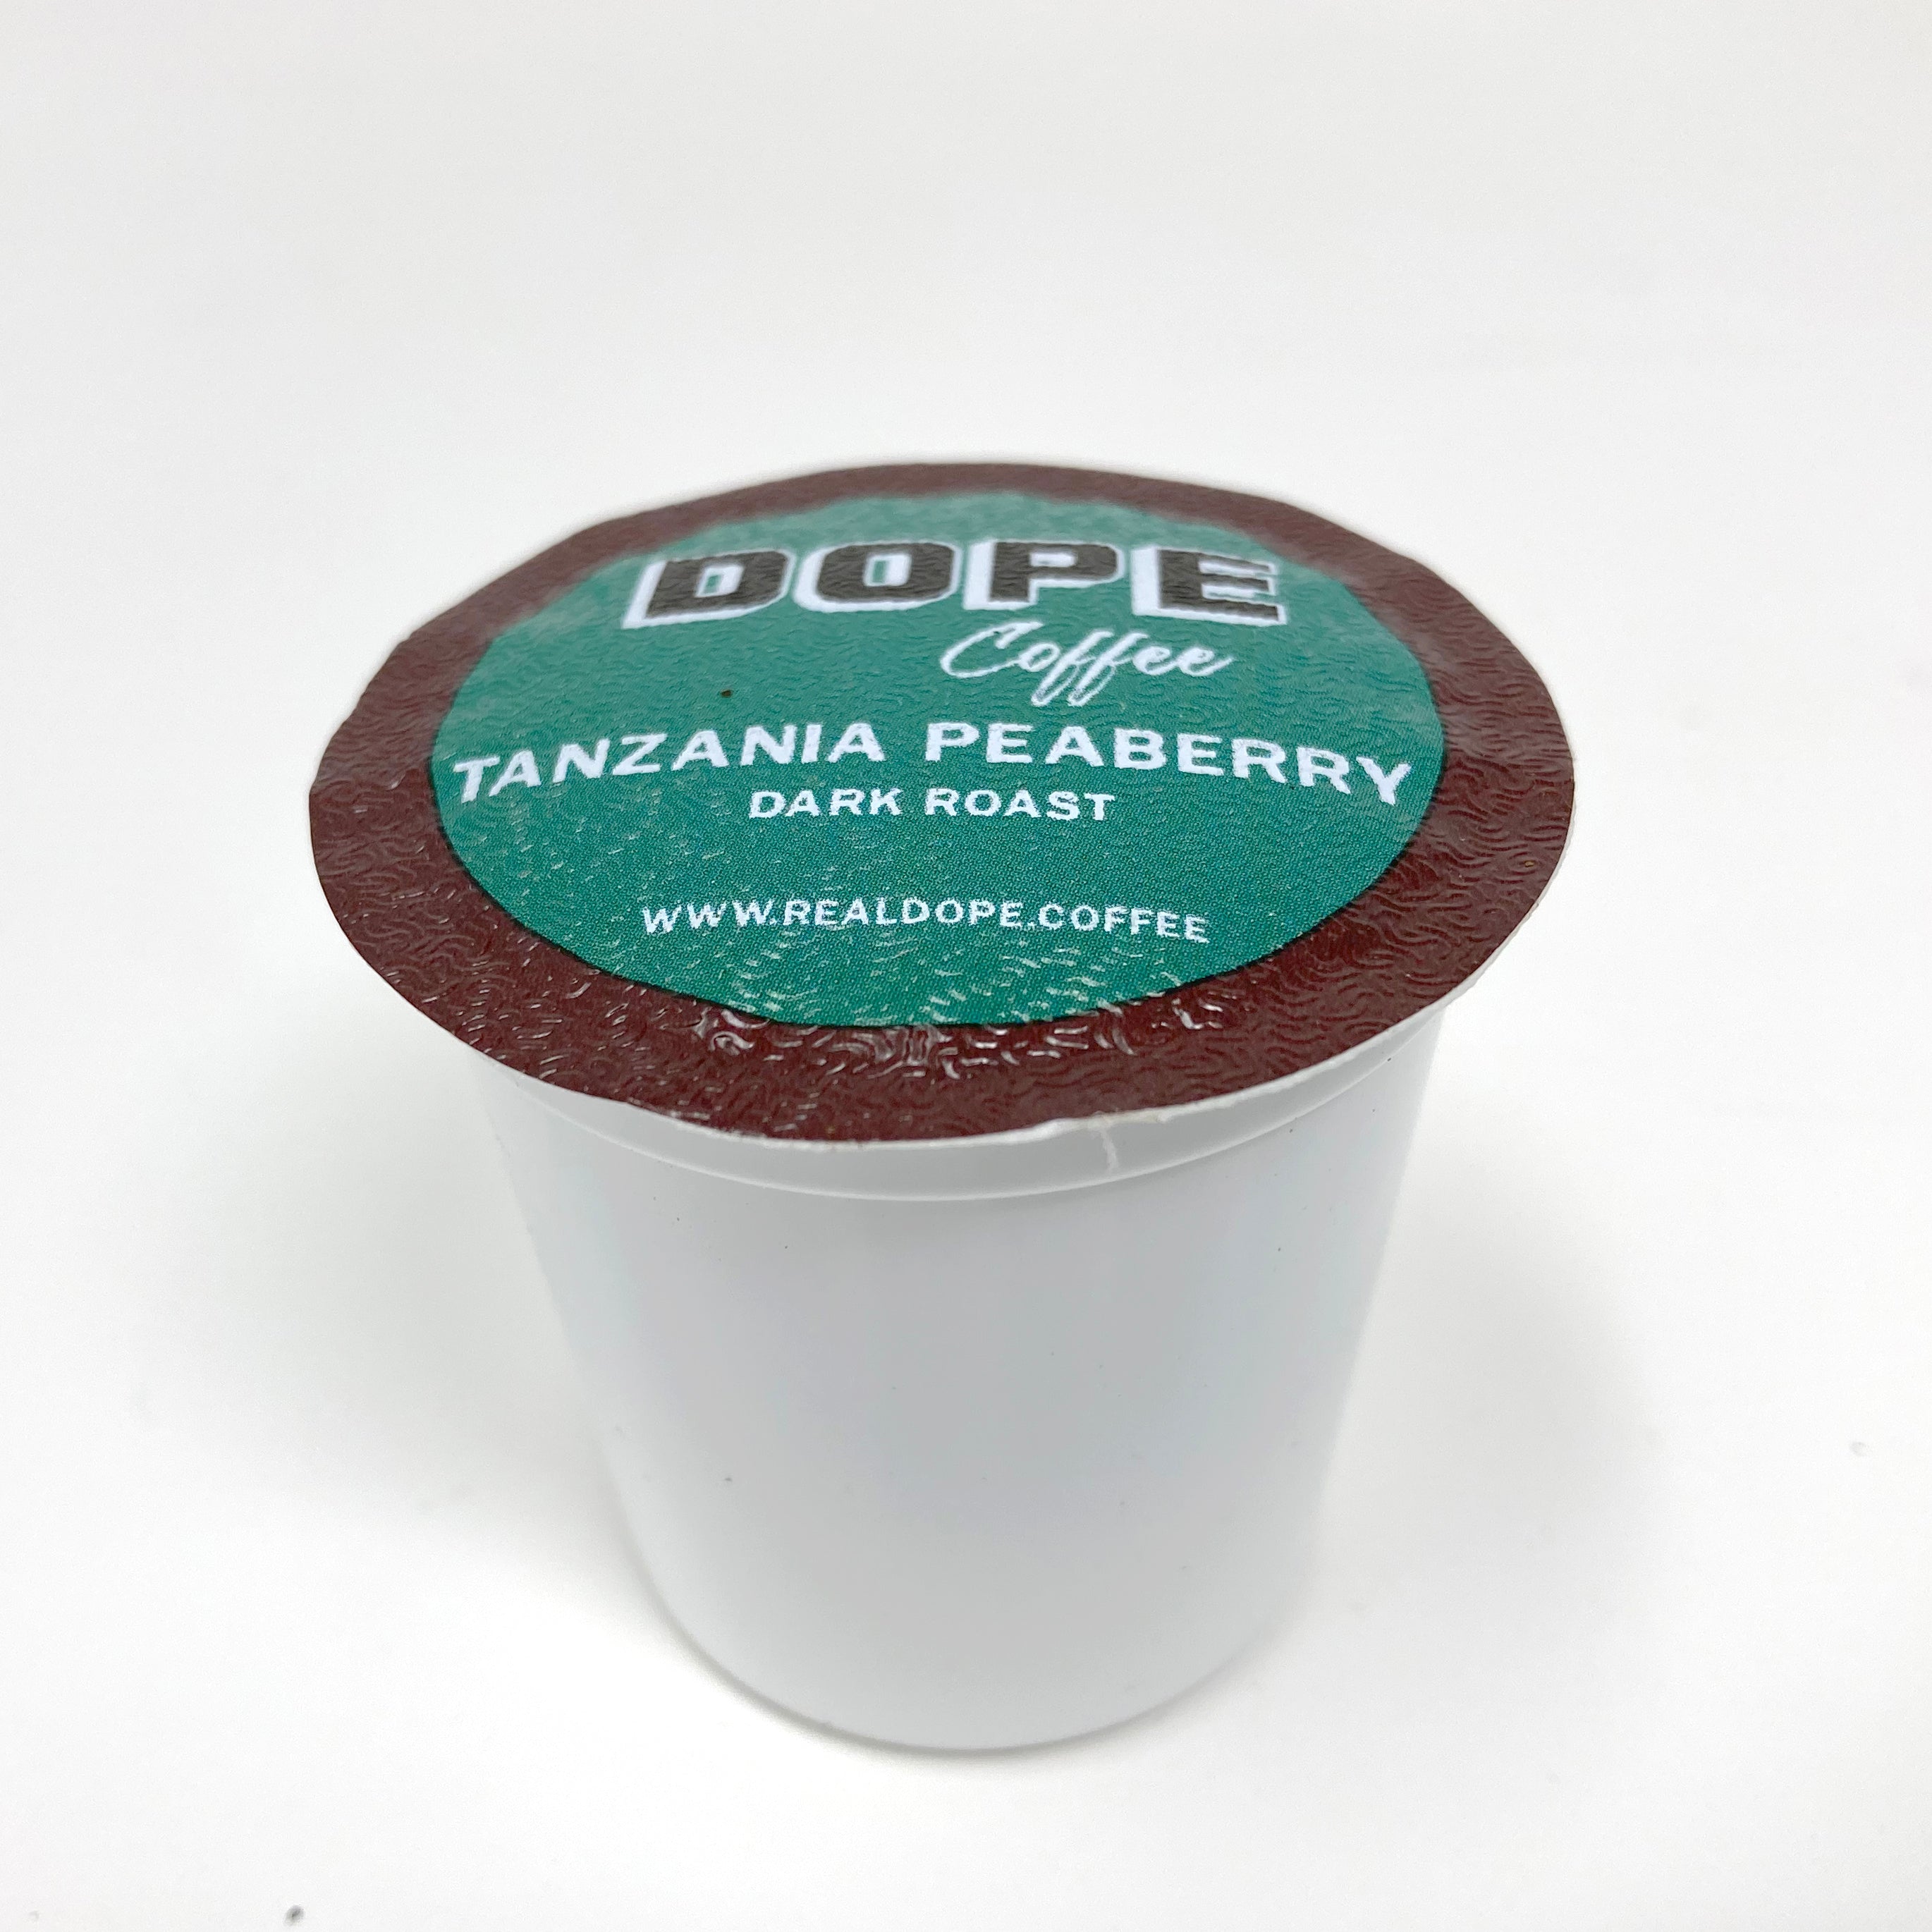 Tanzania Peaberry Coffee Pods Subscription